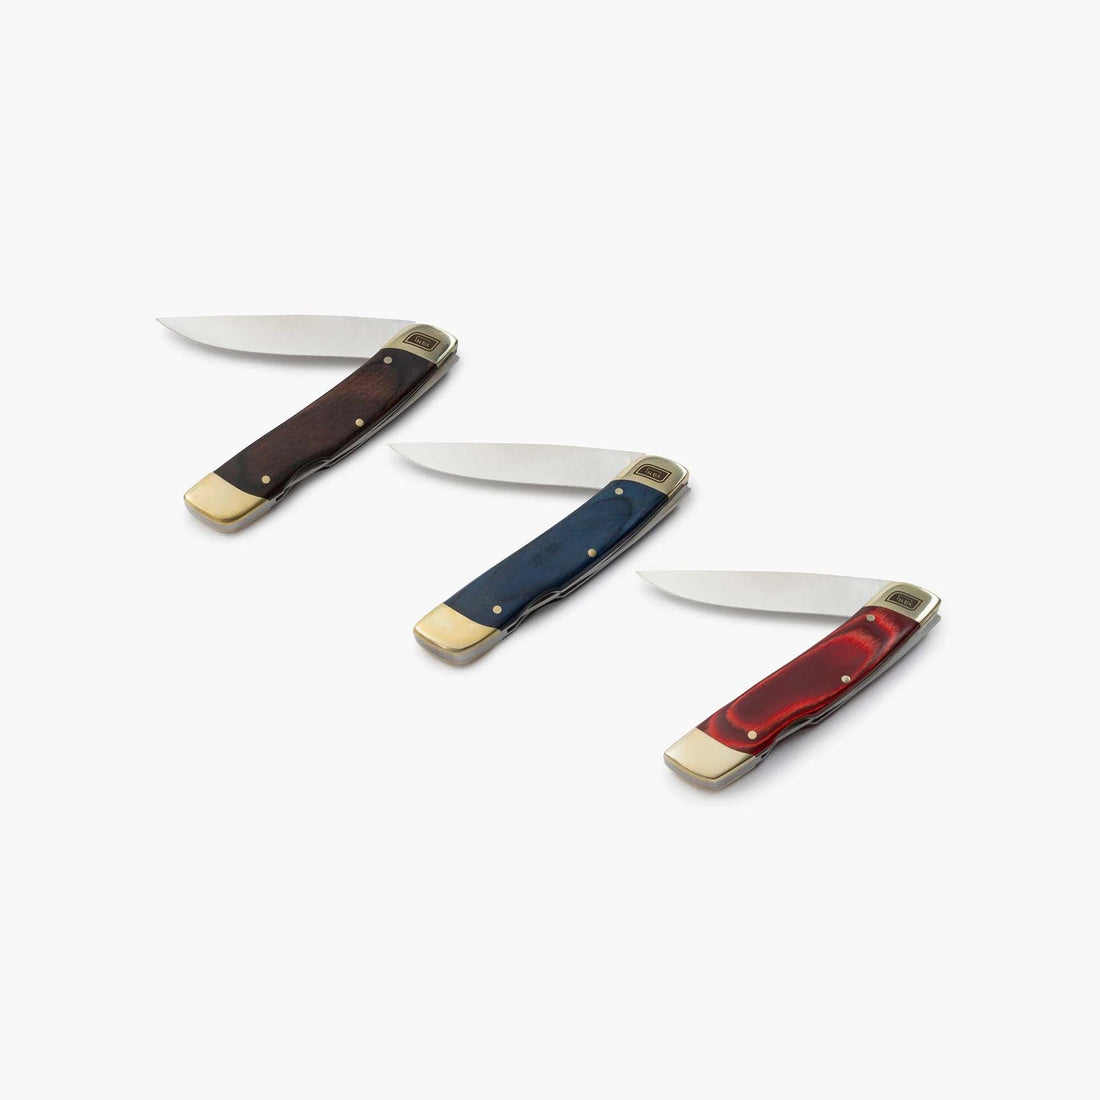 This Brass Pocket Knife Is an Essential Accessory for Every Man